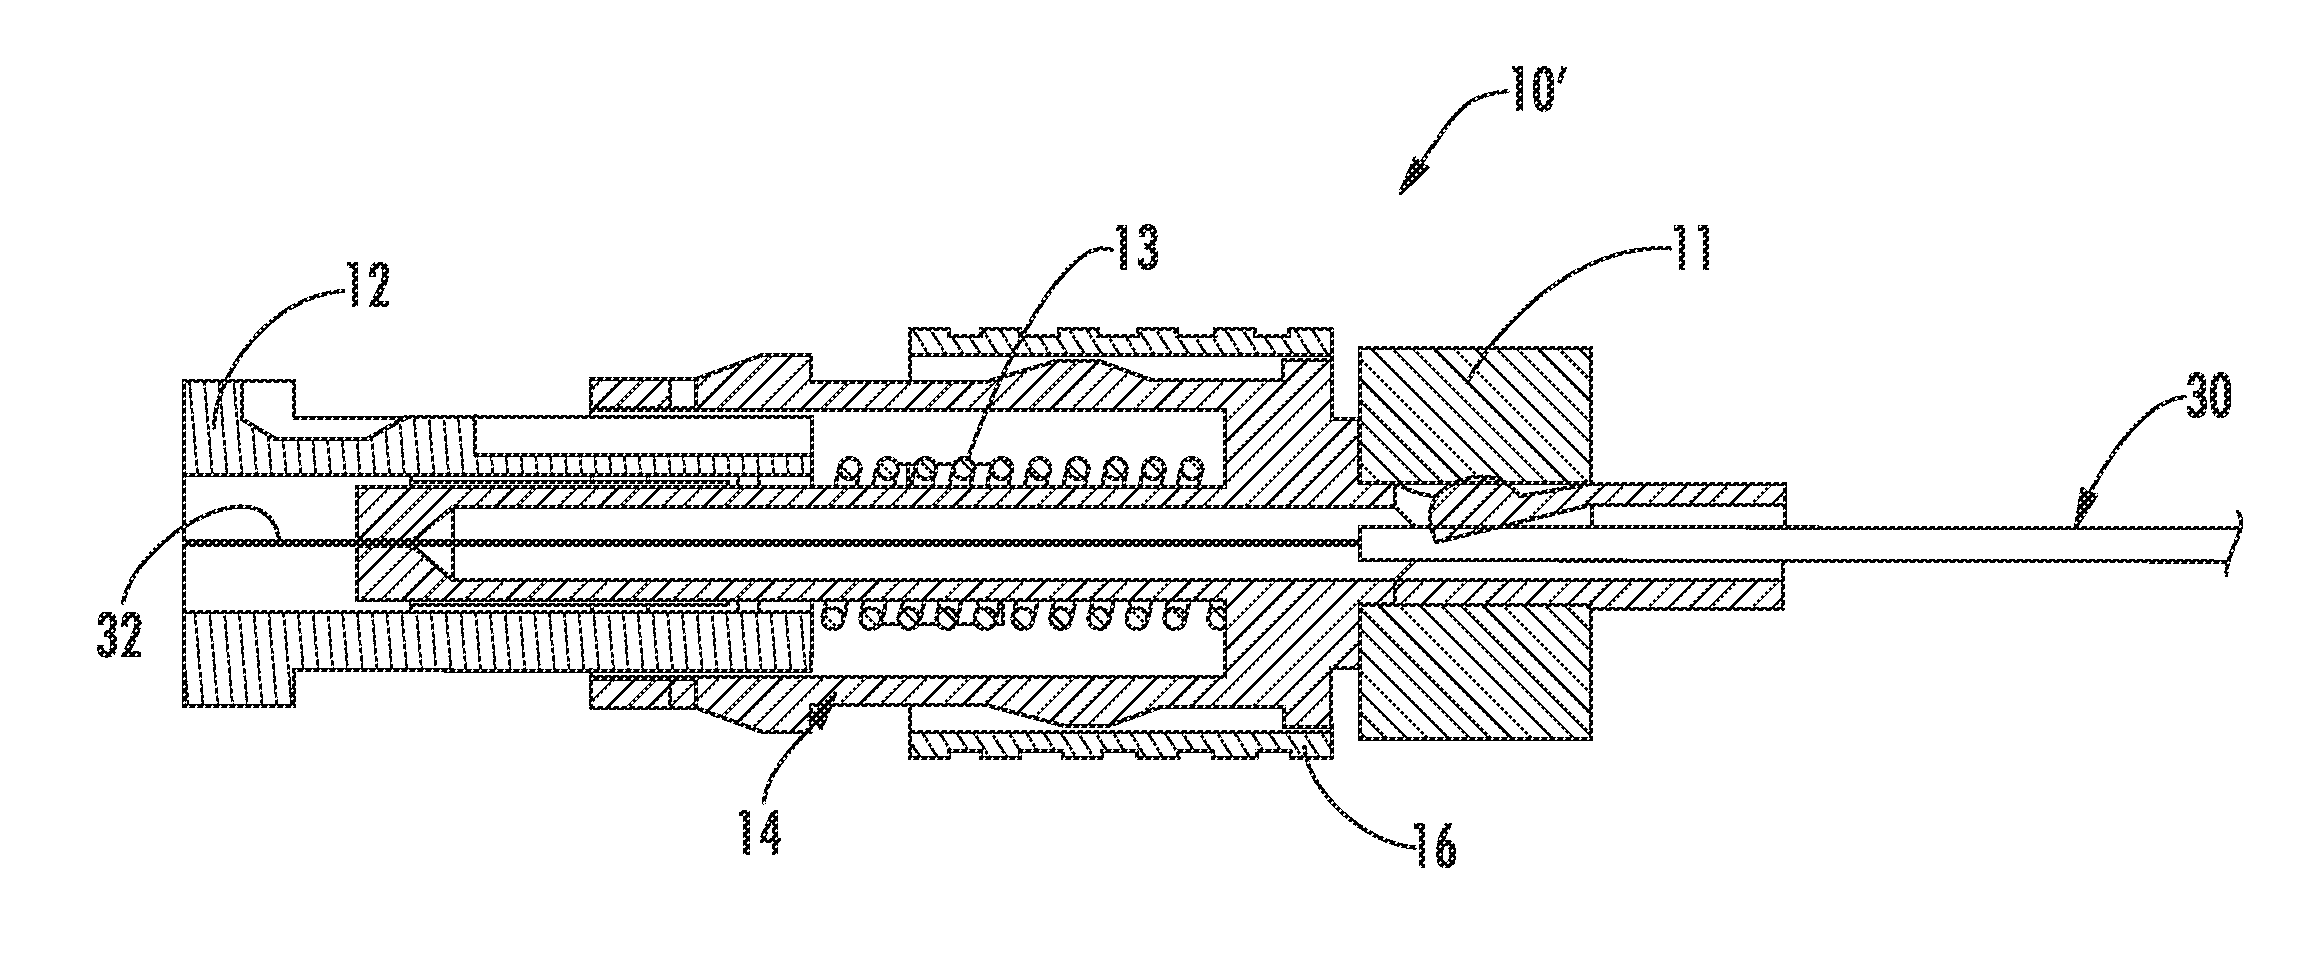 Termination system for fiber optic connection